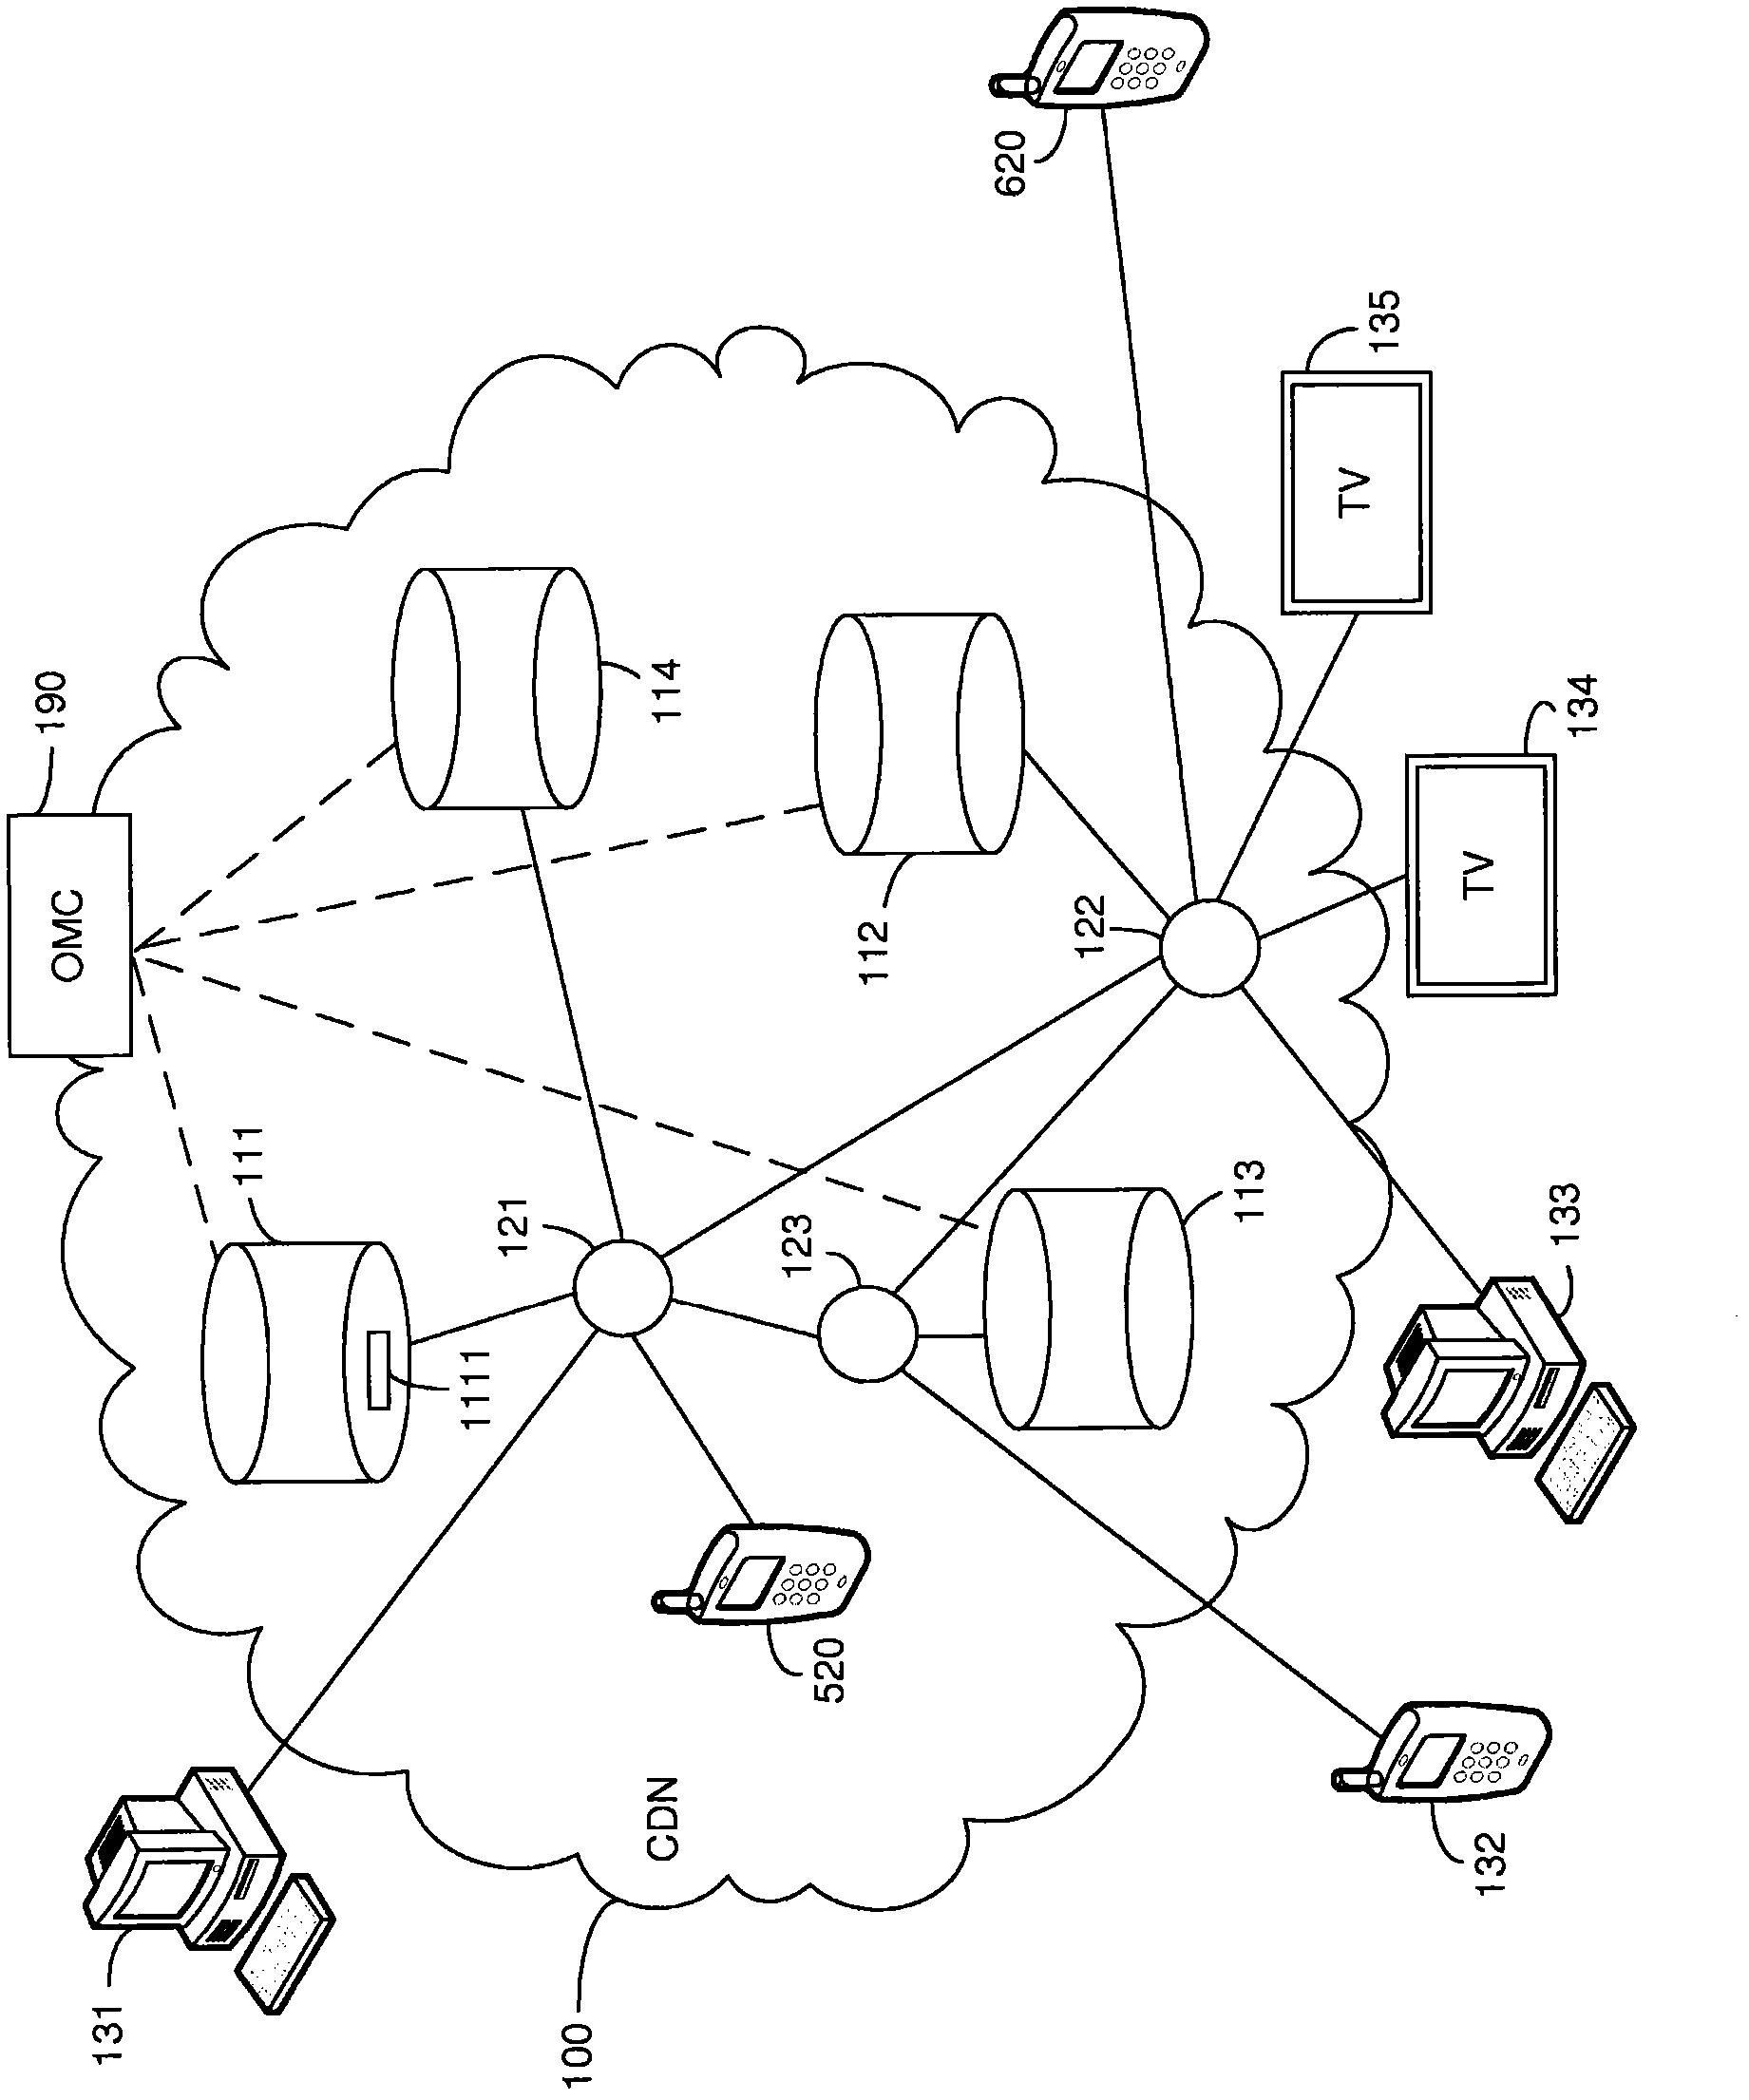 Method for content delivery involving a policy database